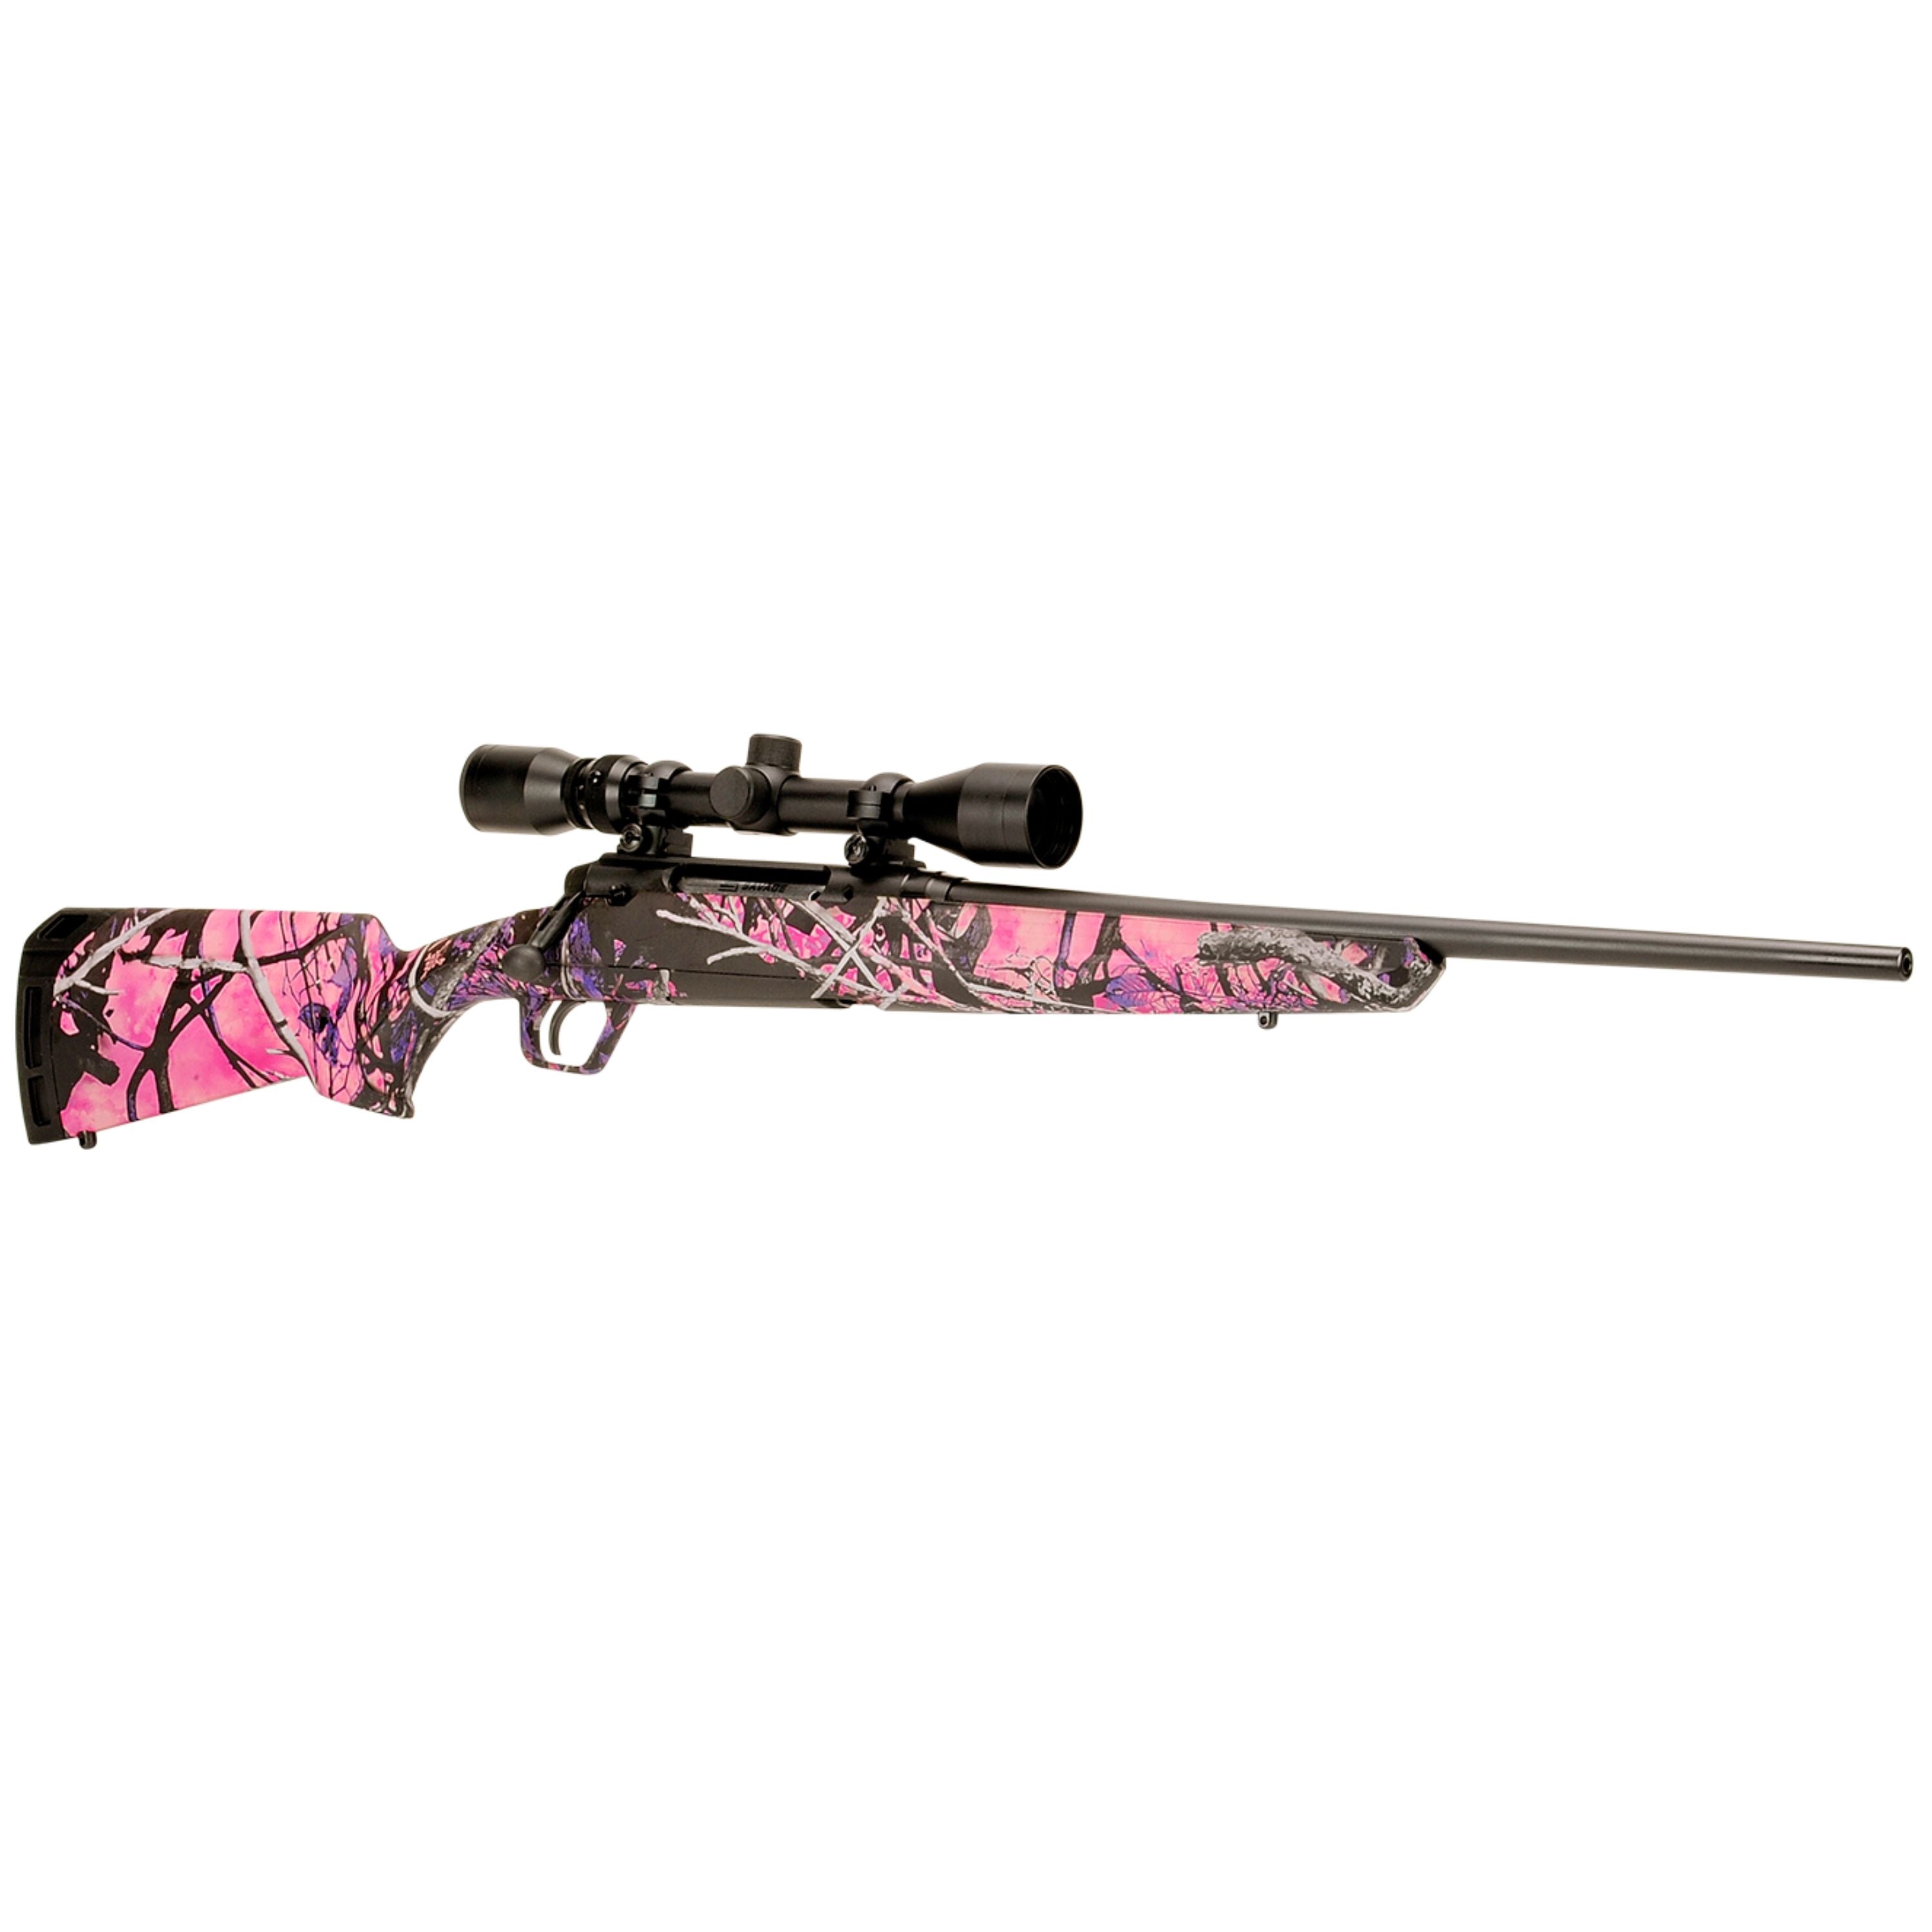 AXIS XP Compact Muddy Girl cal. 7mm-08 REM bolt action rifle with